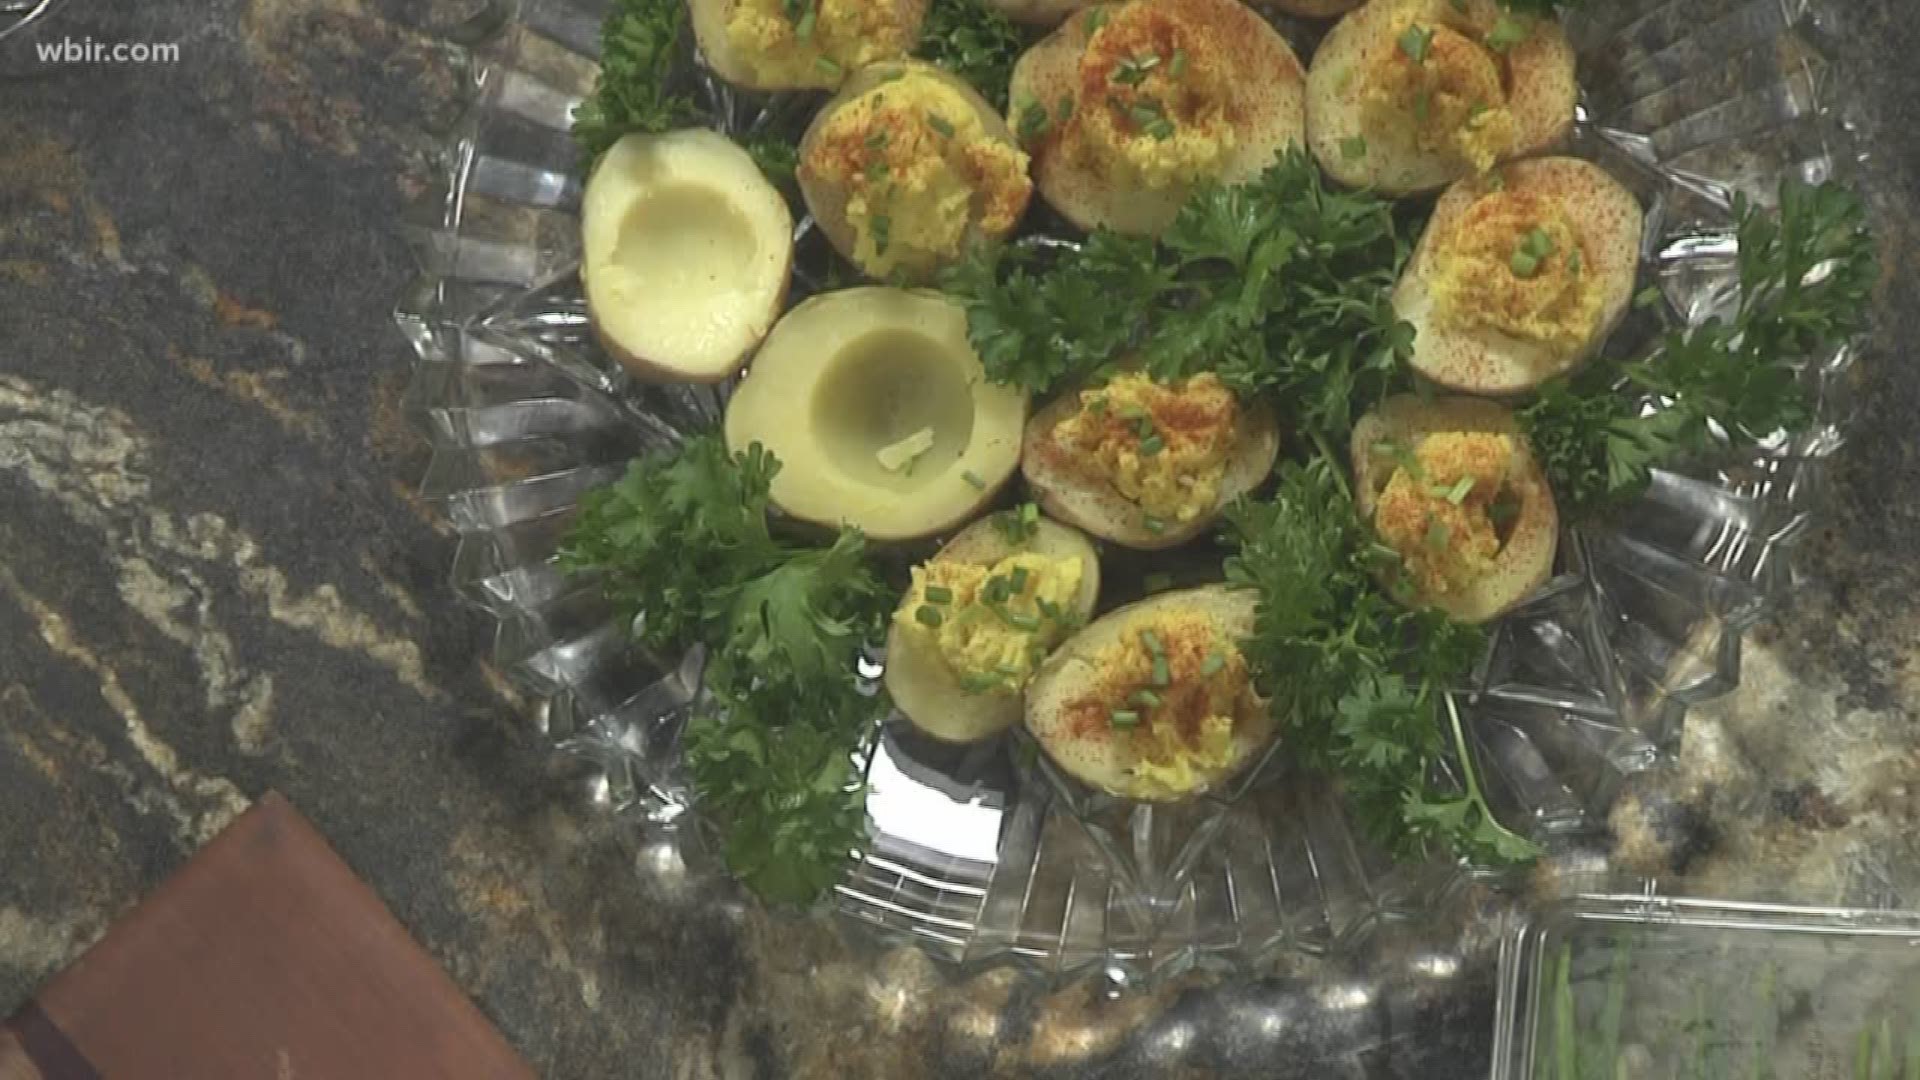 Health coach Camille Watson joins us in the kitchen to make a simple recipe that can also satisfy many of the different dietary restrictions you might see at a holiday party - deviled potatoes.